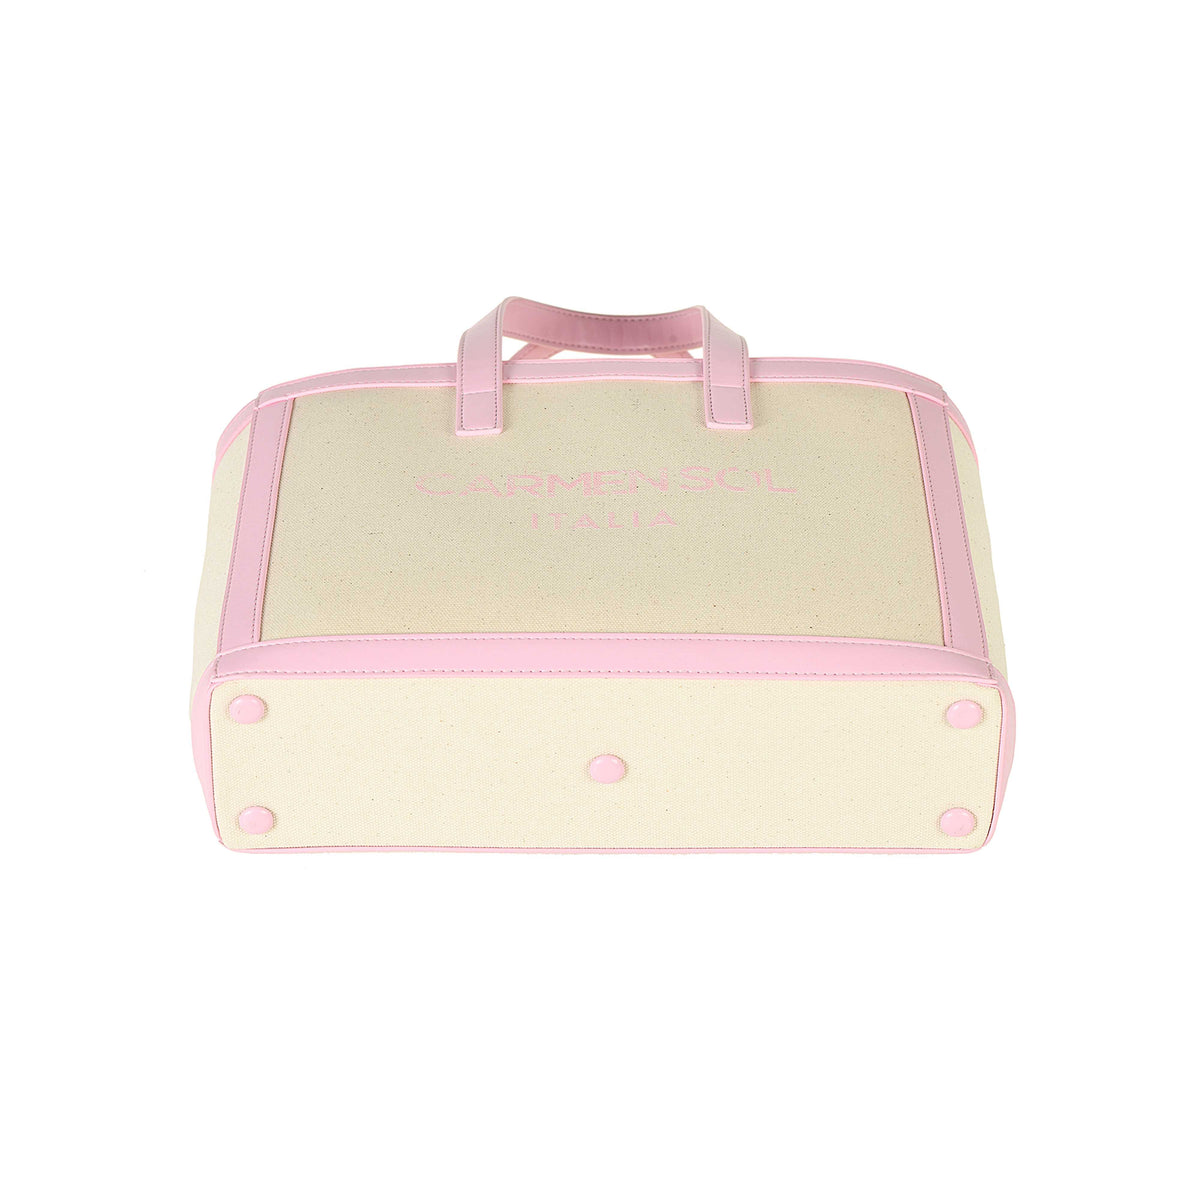 Side view of mini canvas beach purse in color baby pink